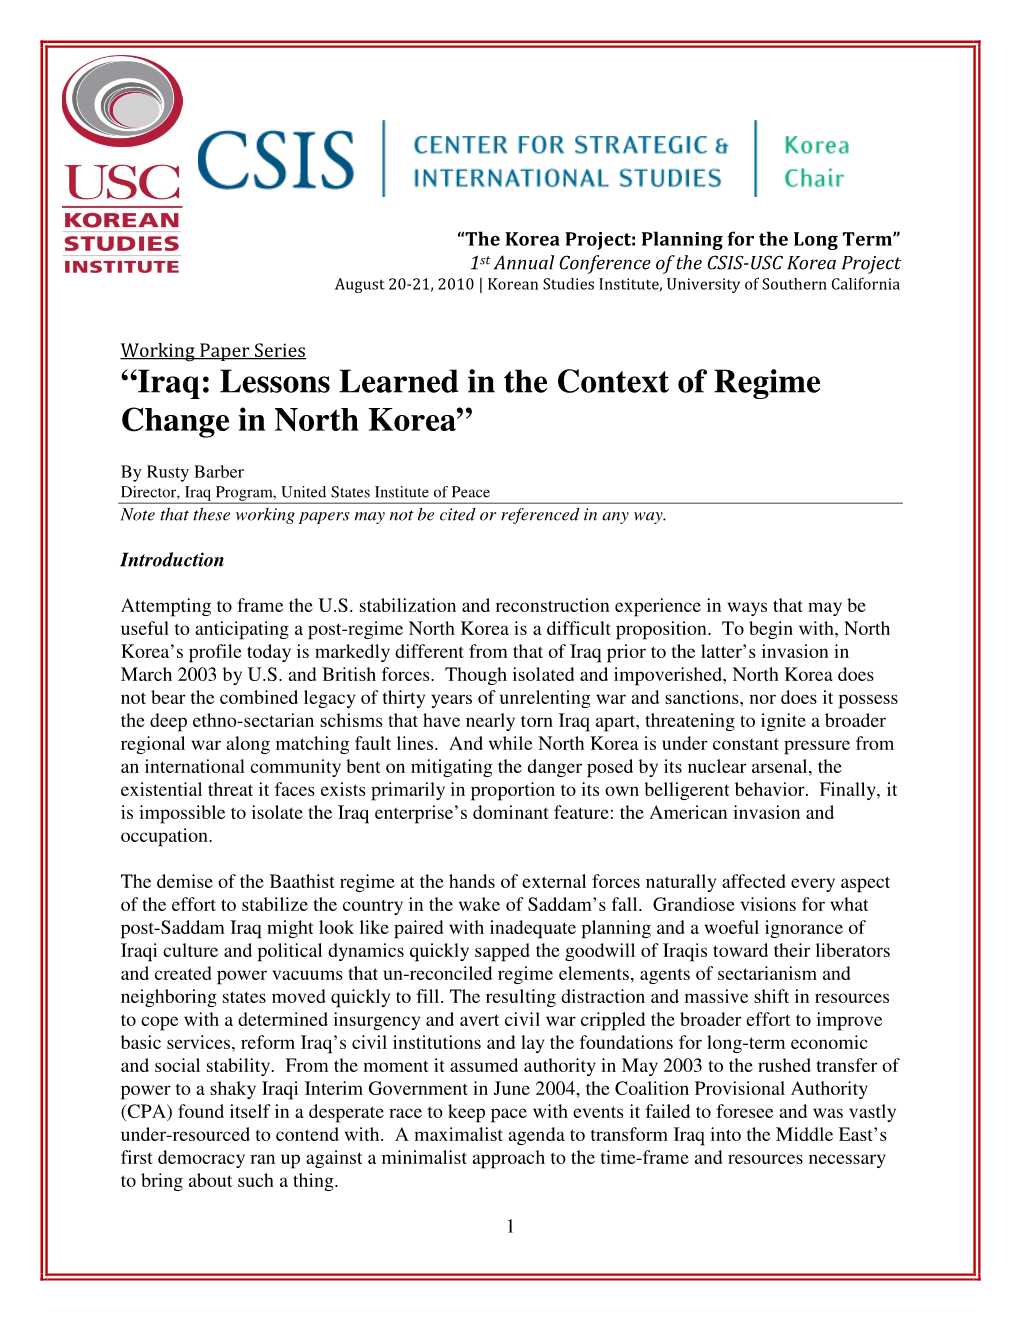 “Iraq: Lessons Learned in the Context of Regime Change in North Korea”